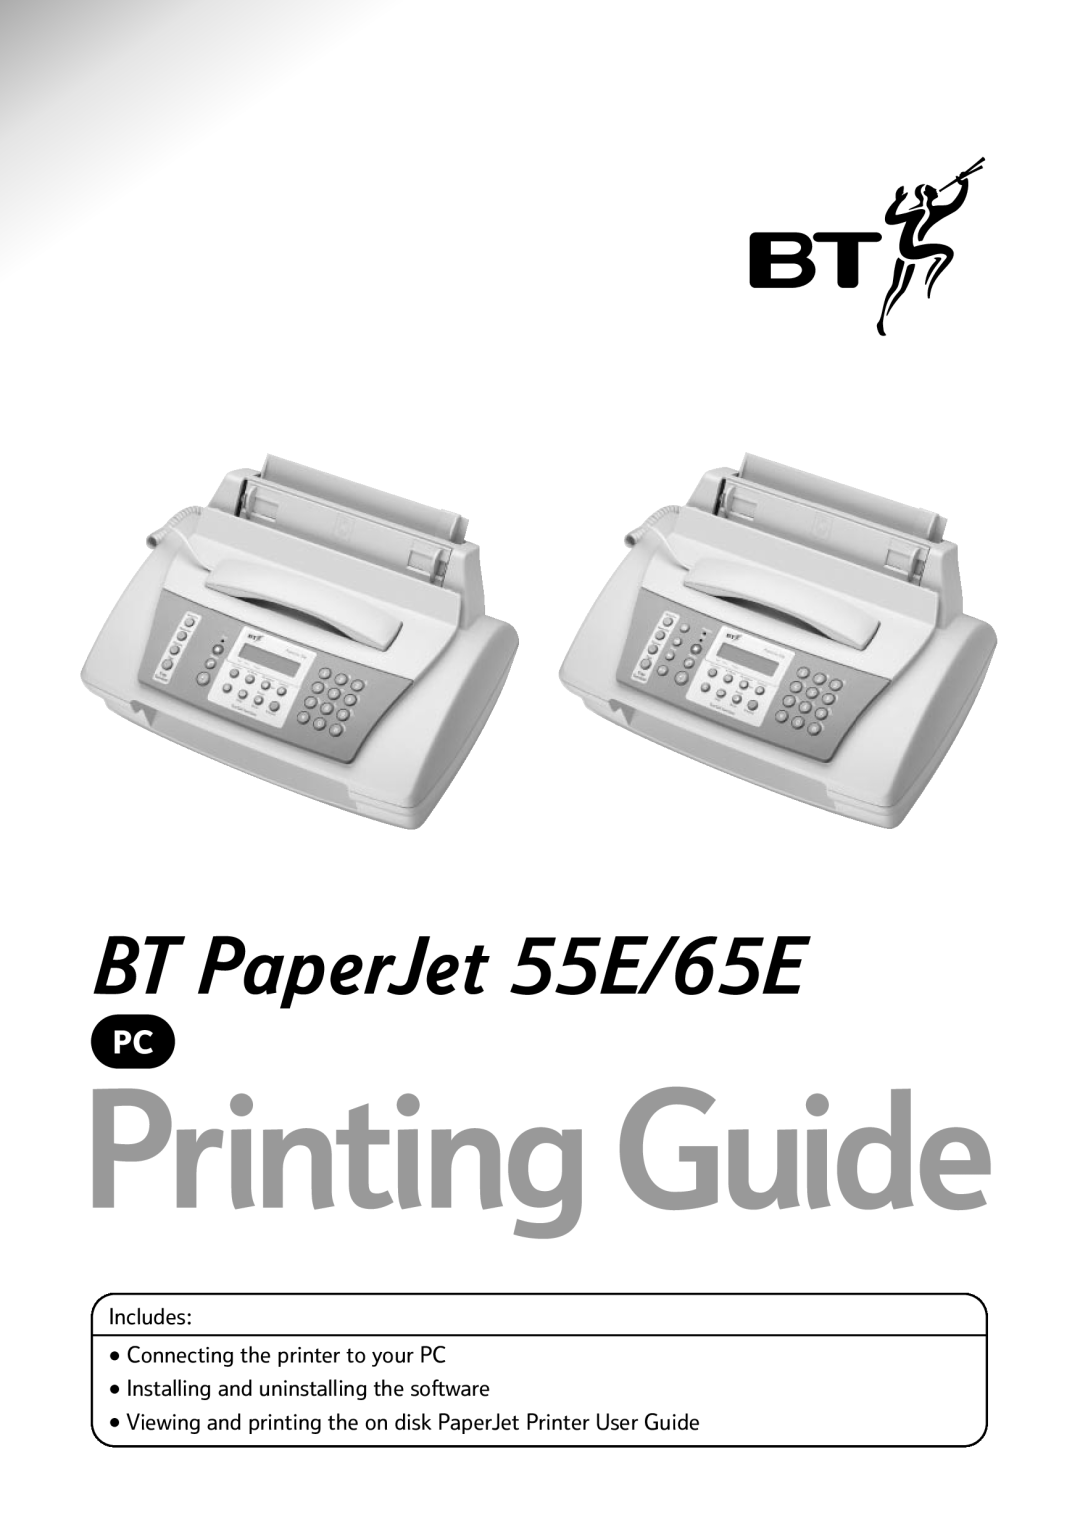 BT 65e manual Includes Connecting the printer to your PC, Installing and uninstalling the software, Printing Guide 